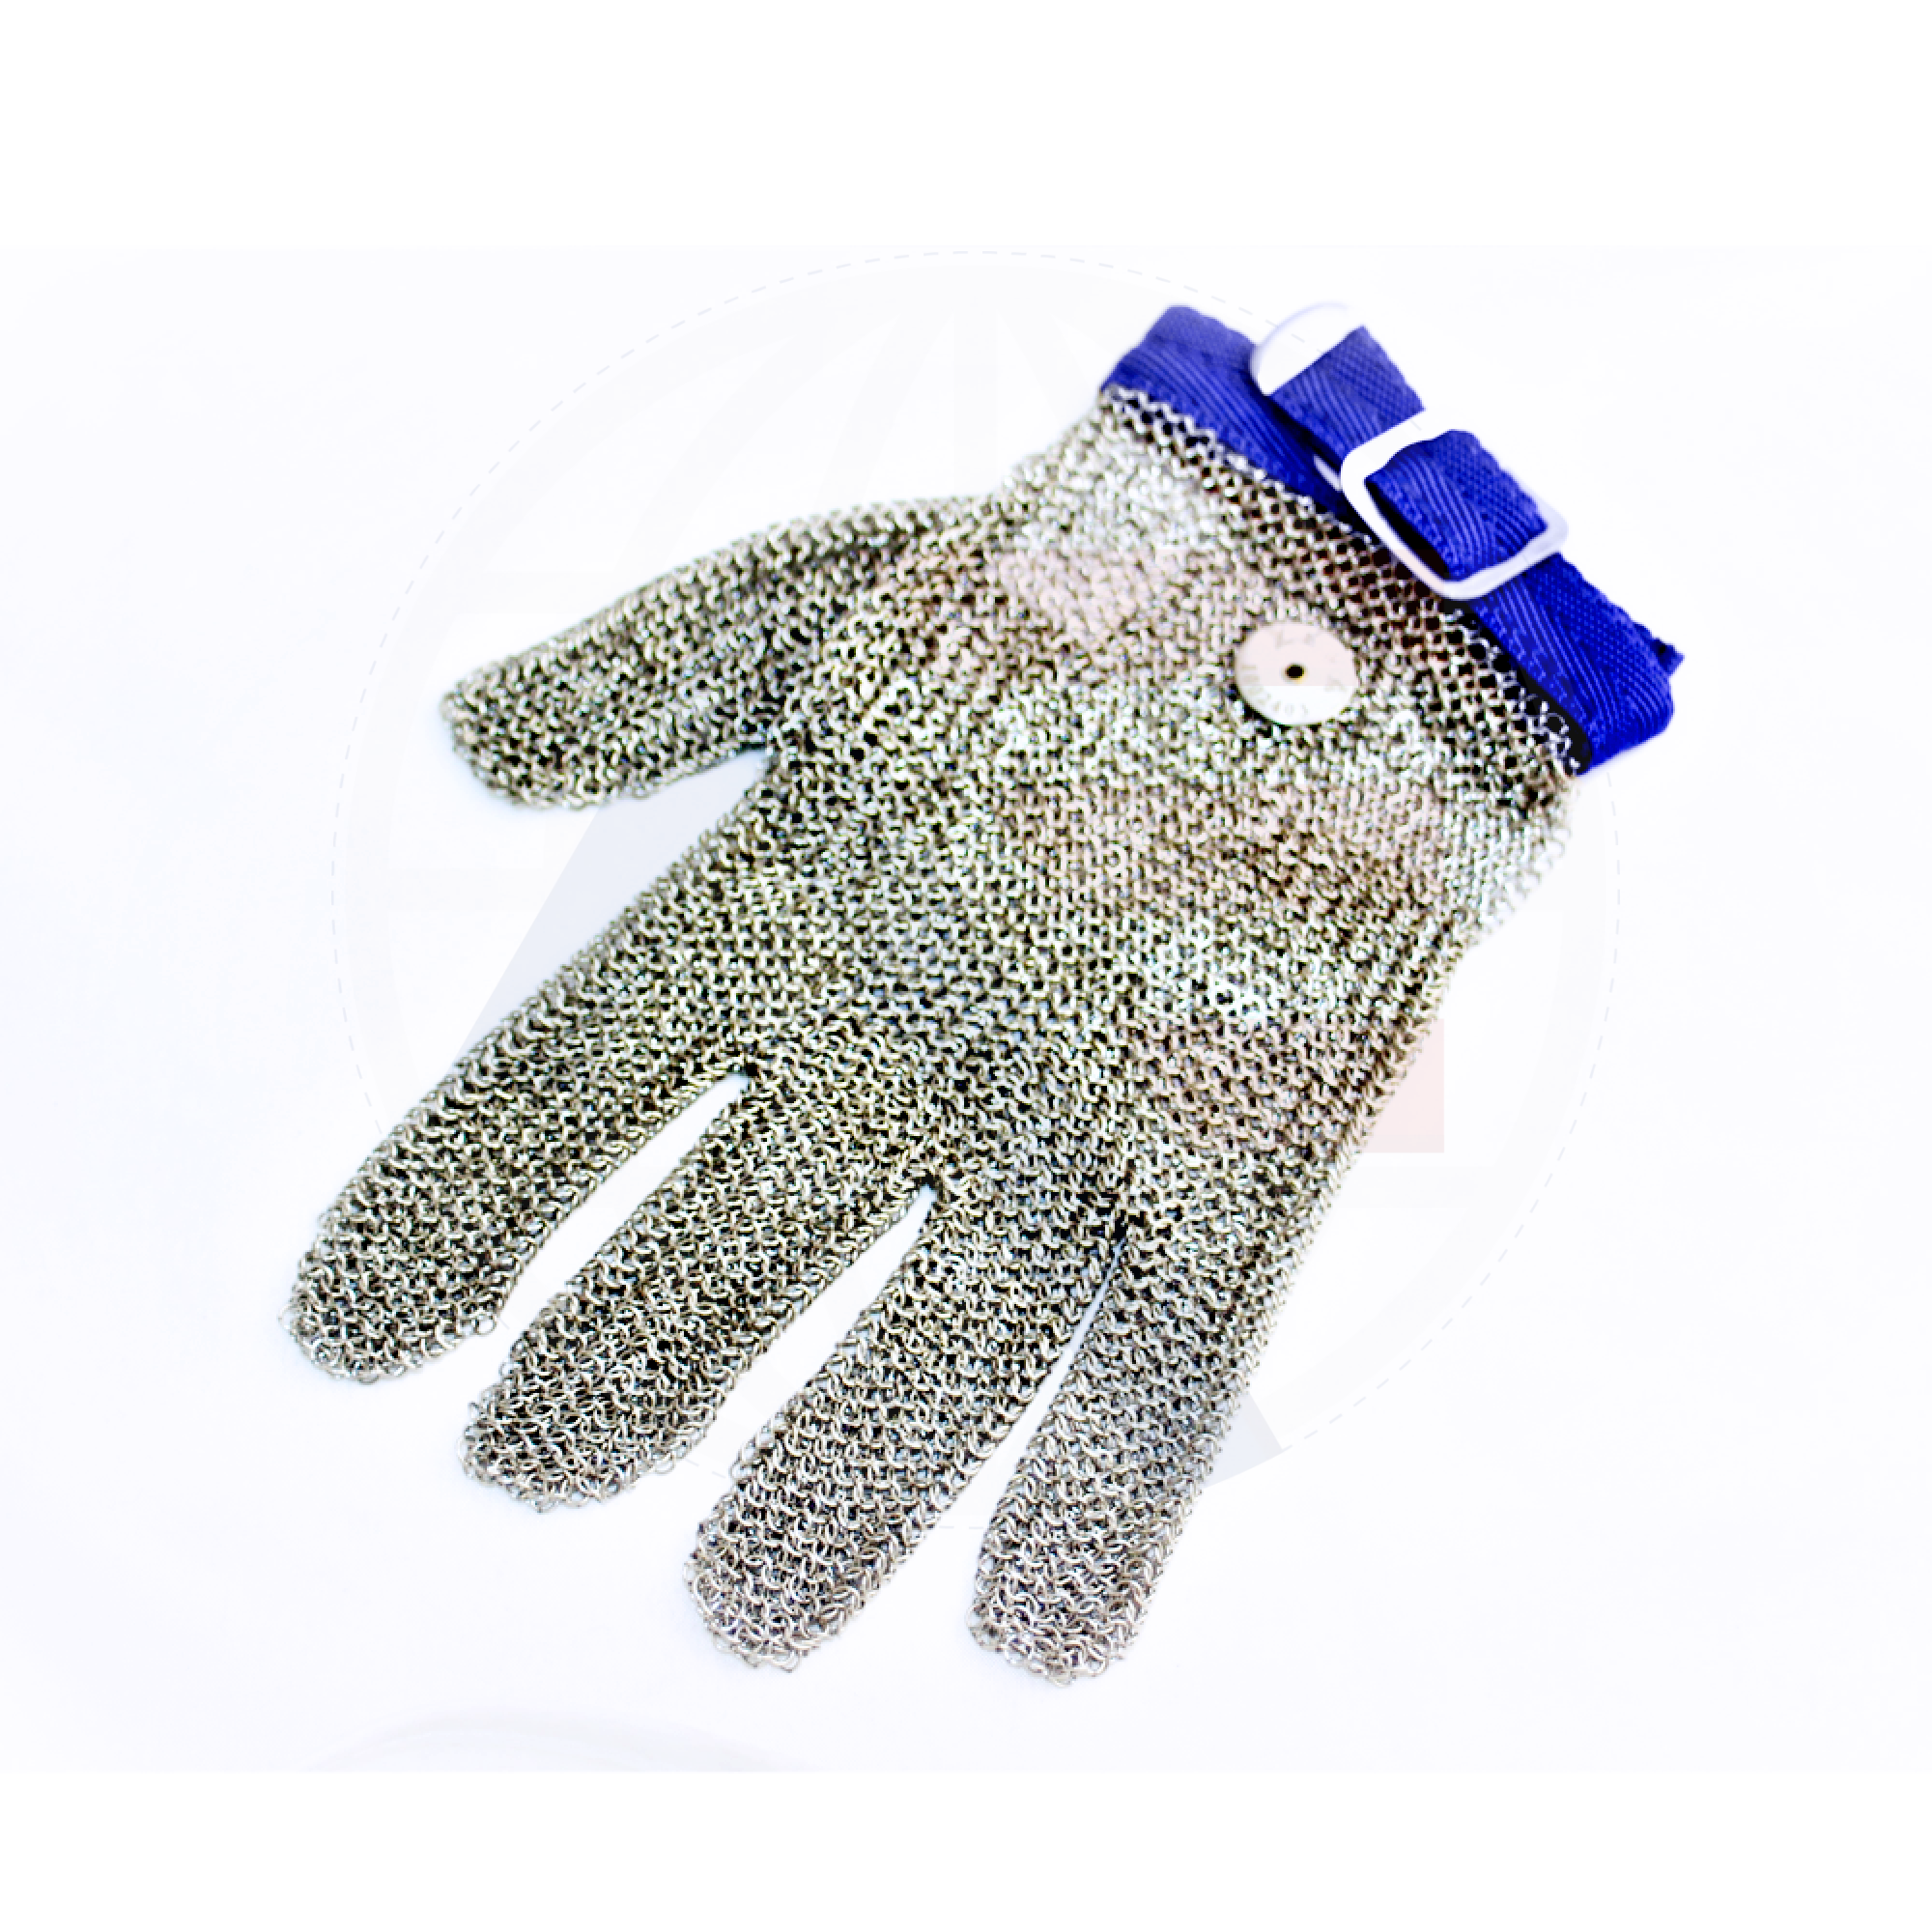 Chainmailglove Protective Safety Glove L